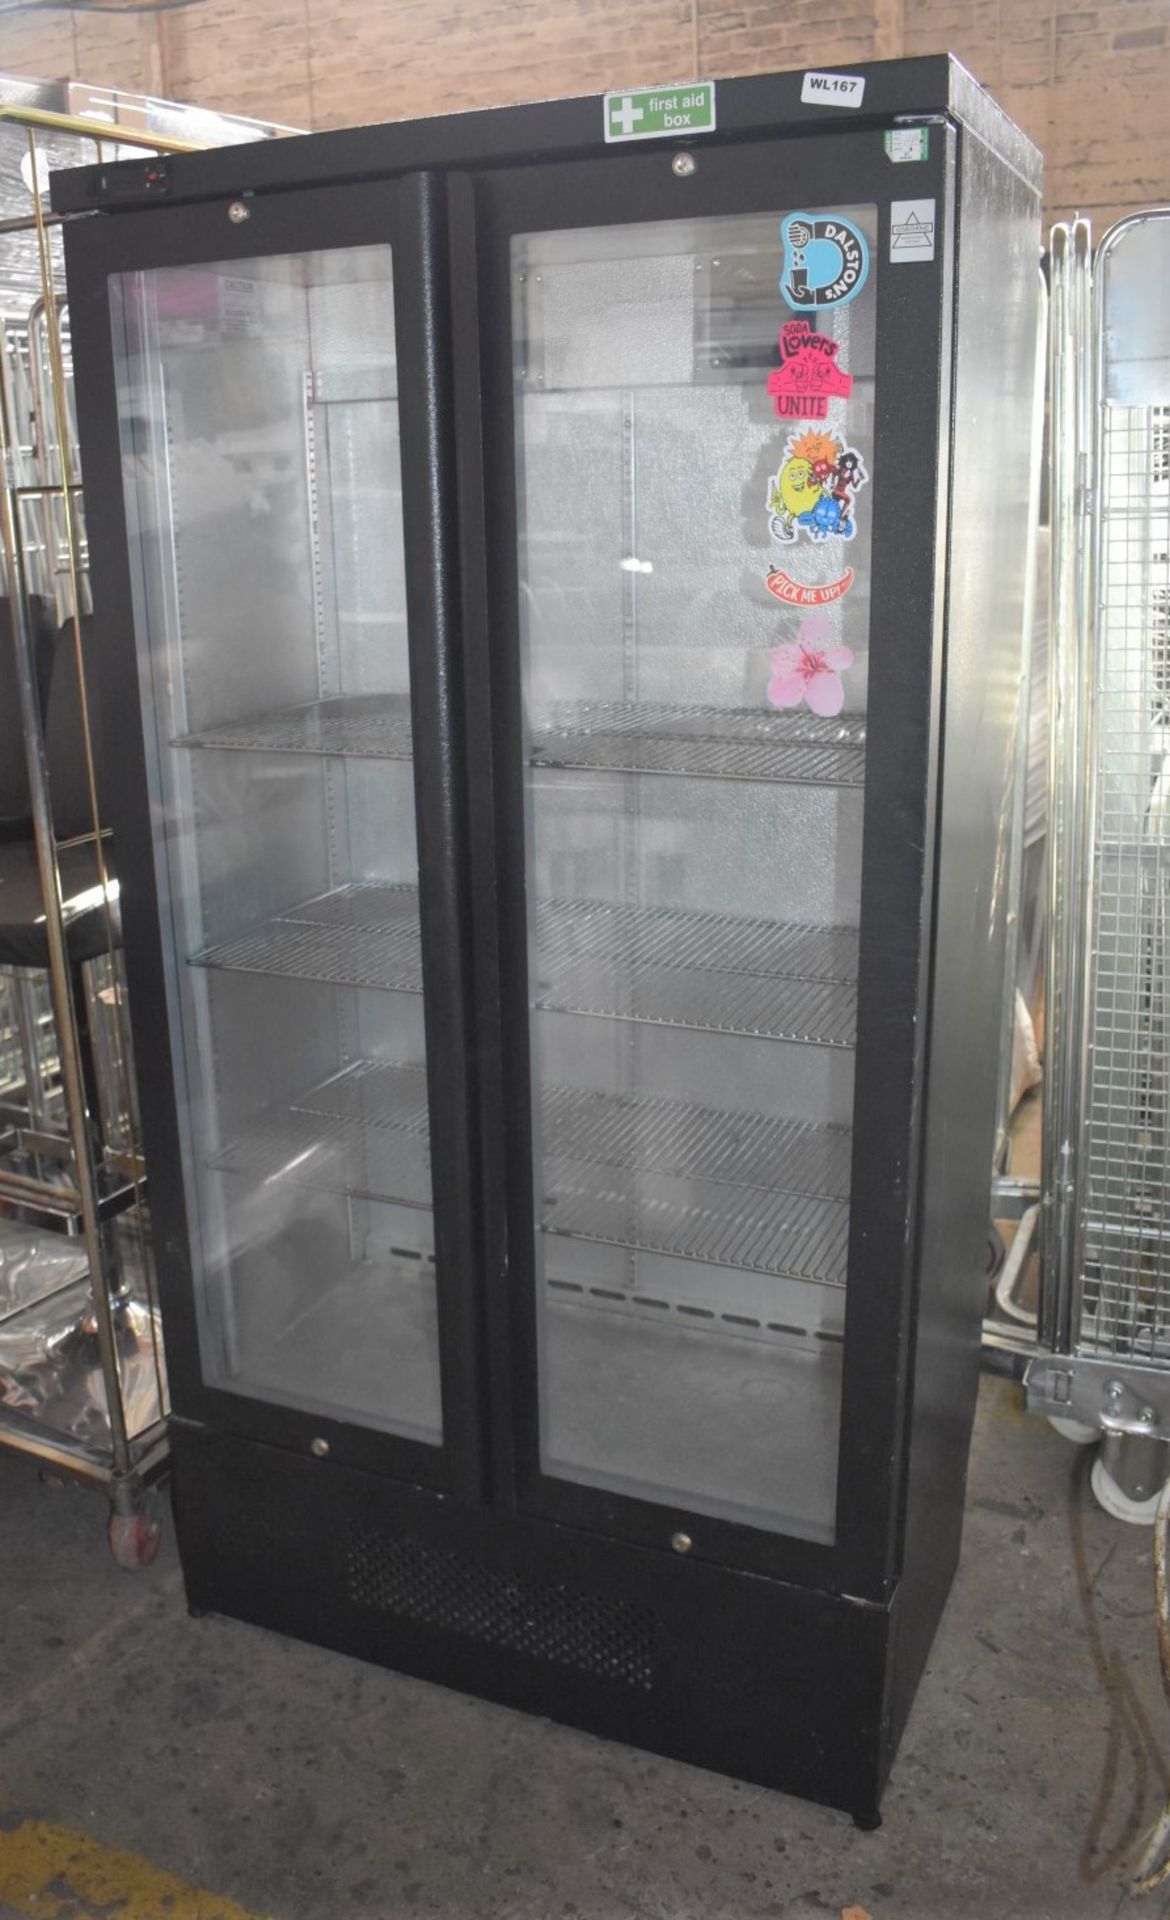 1 x Osborne 350E Two Door Upright Display Drinks Chiller - CL011 - Ref 167 WH3 - Location: